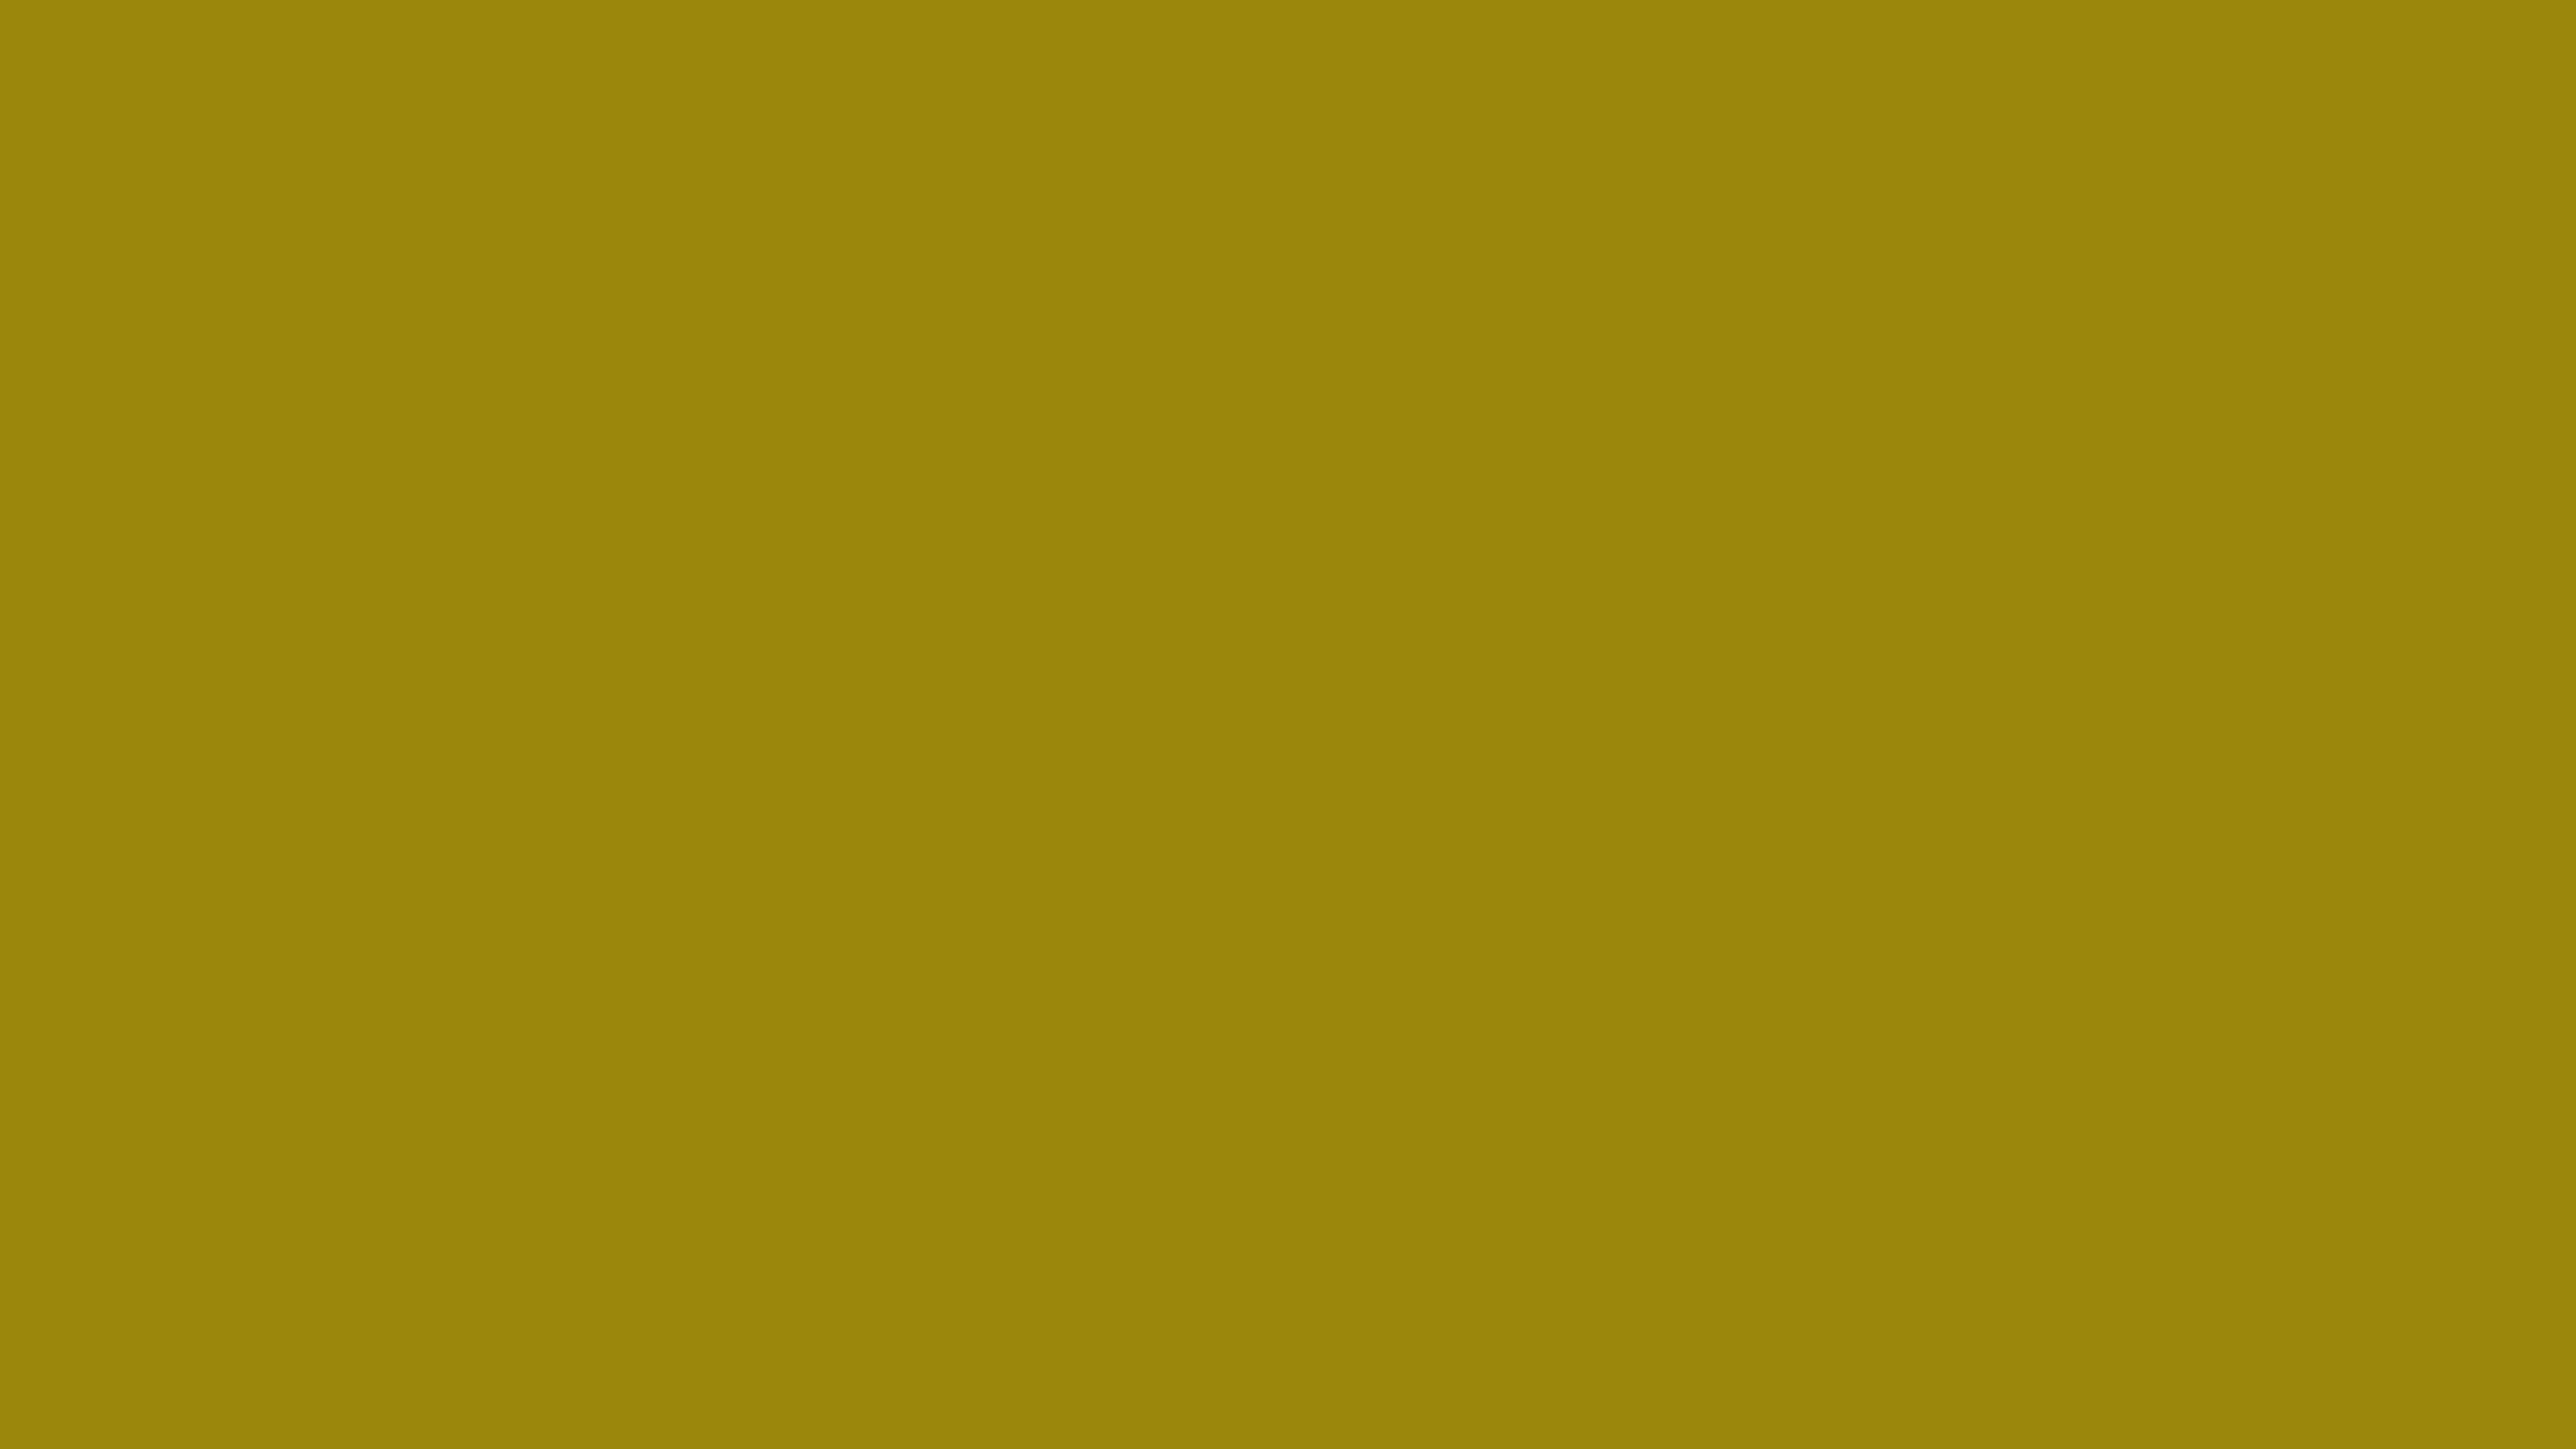 4096x2304 Dark Yellow Solid Color Background